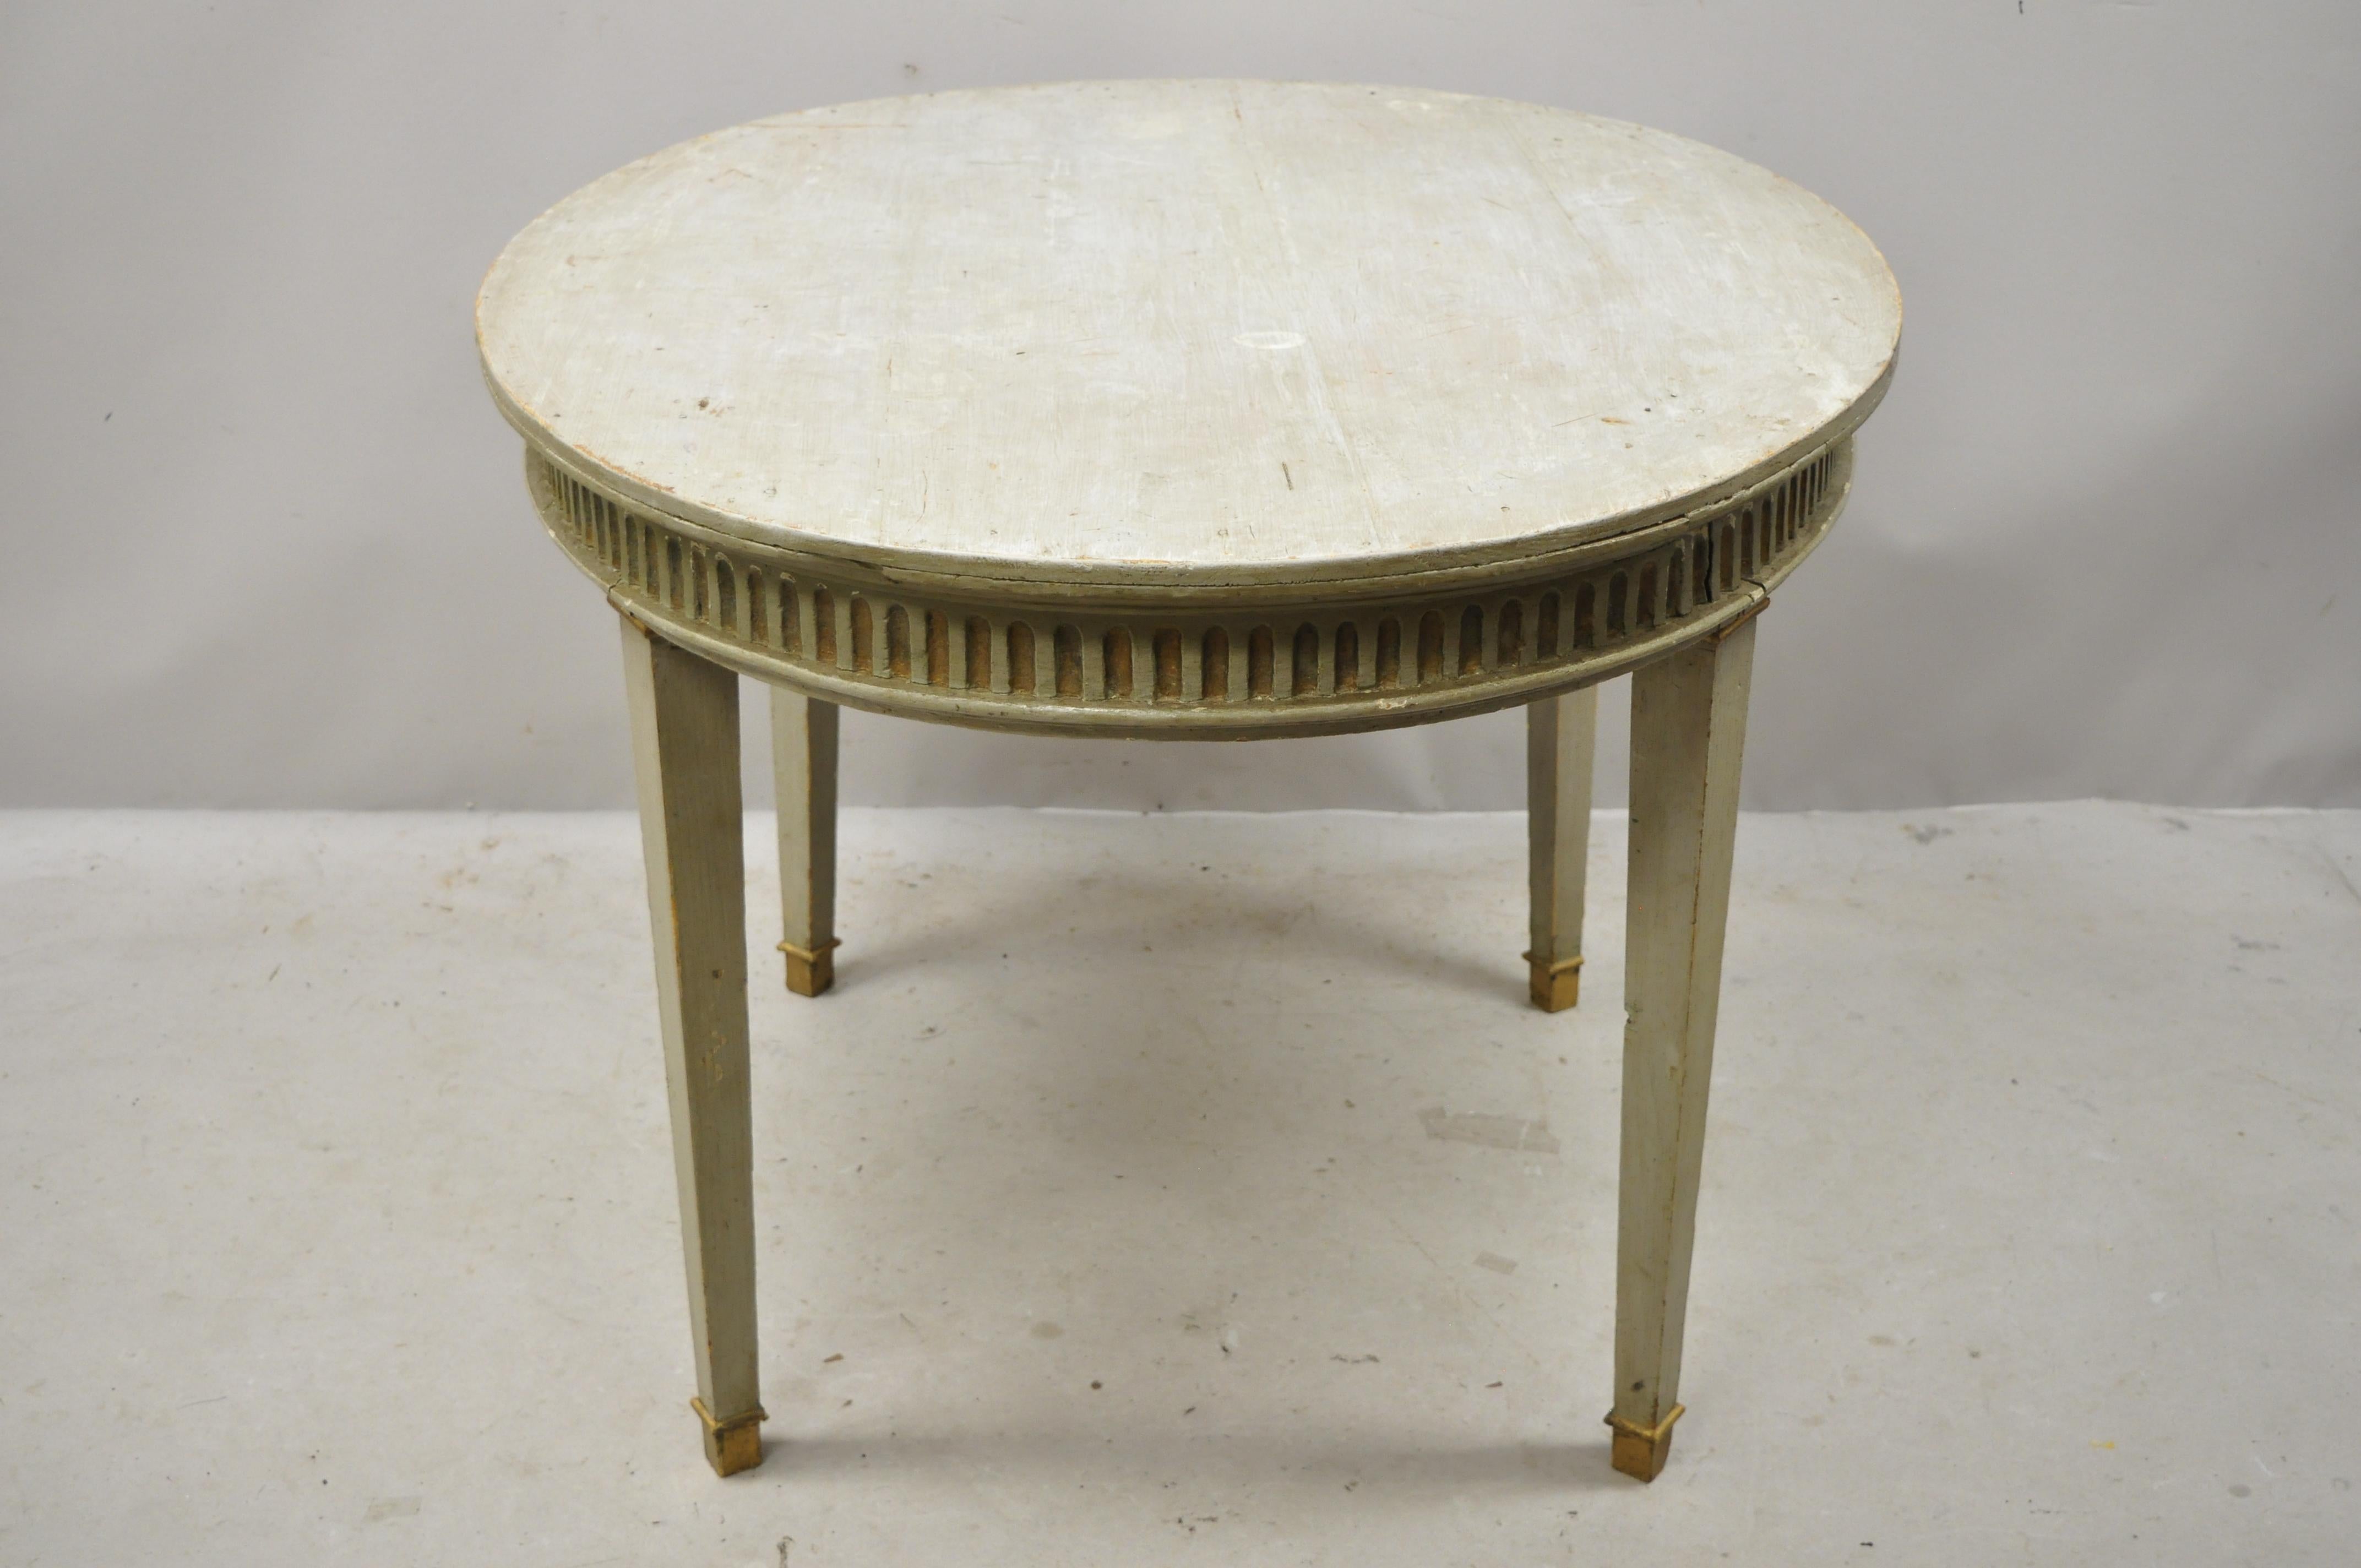 Early 20th century French Louis XVI style distressed green painted small oval dining table. Item features an oval top, gold gilt accents, green distressed finish, nicely carved details, tapered legs, very nice antique item. Probably had another top